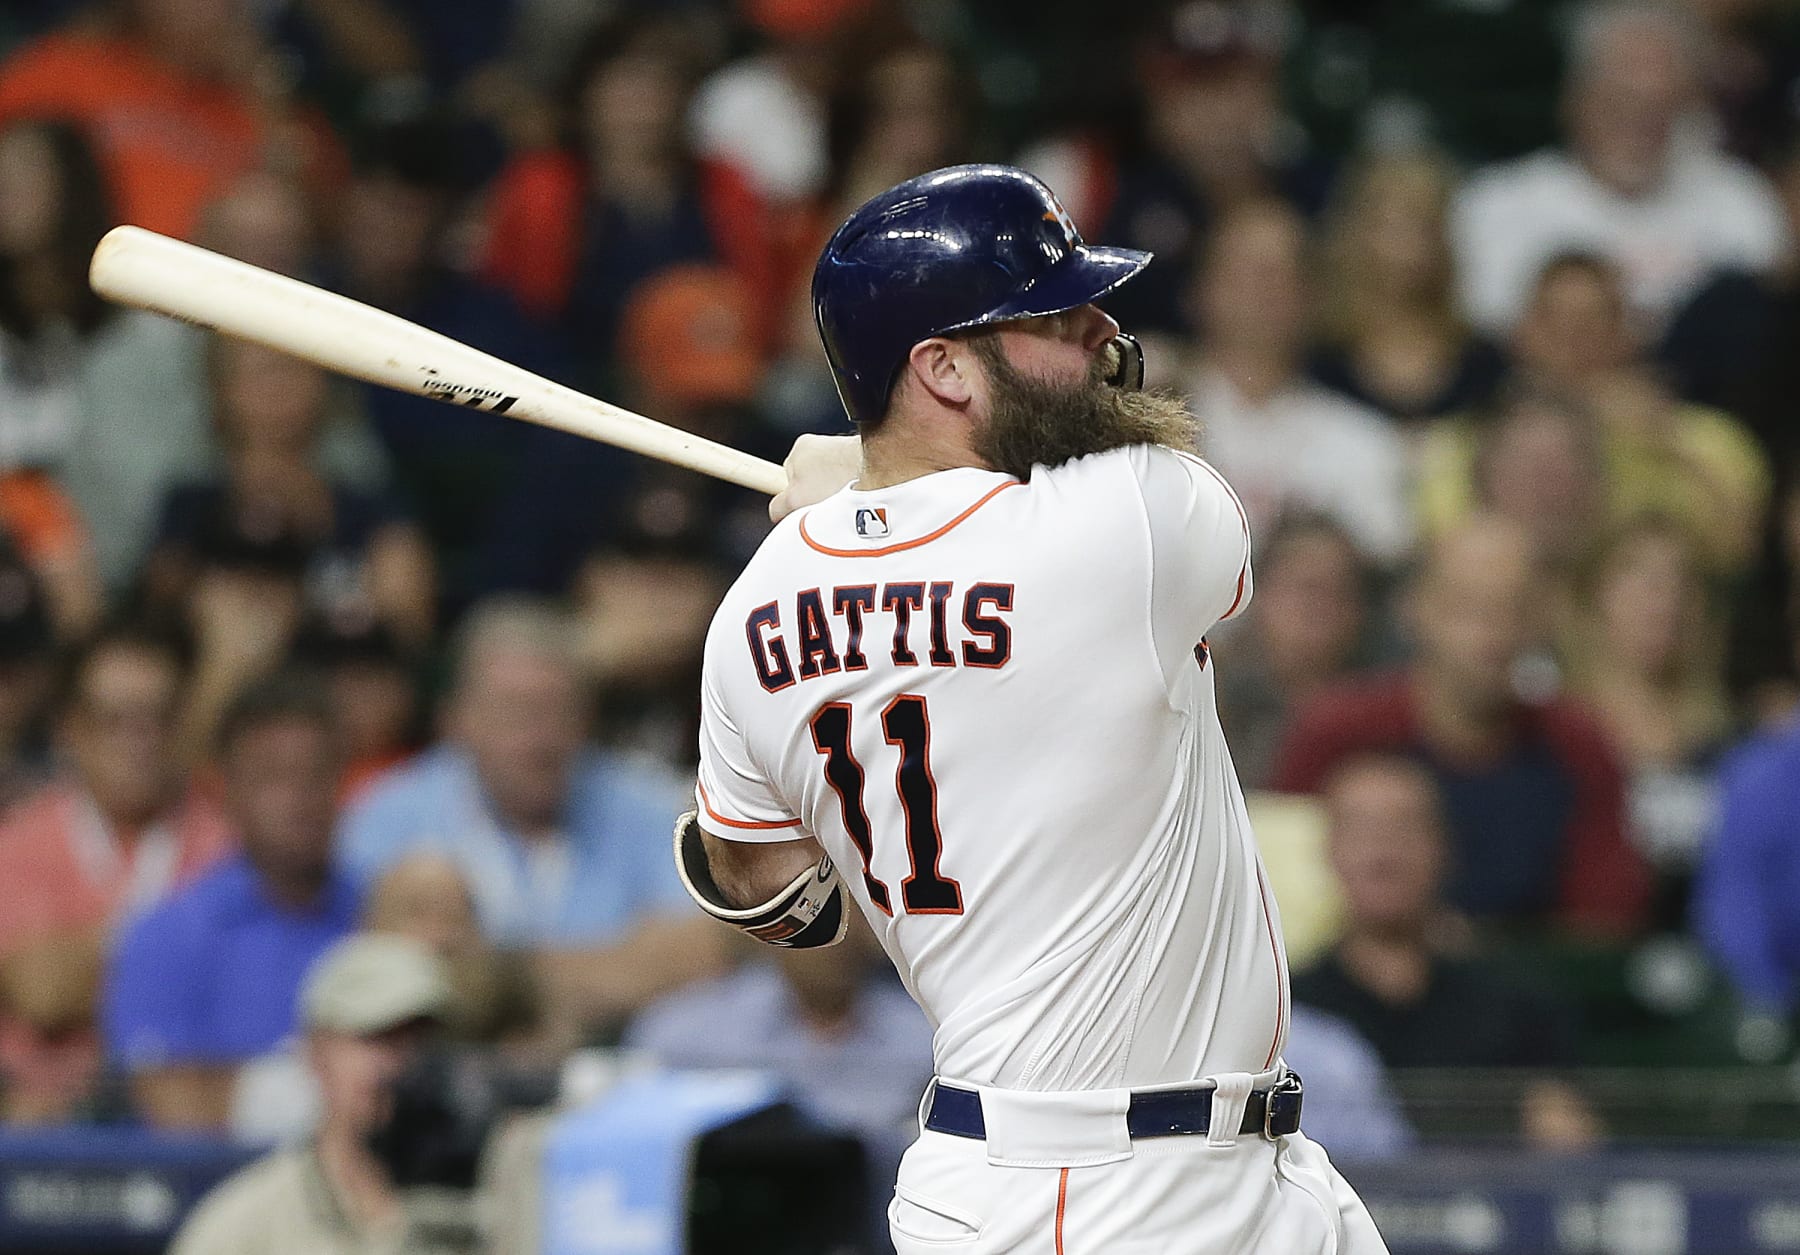 Braves Rookie Evan Gattis Went From Janitor to Cleanup Hitter - The New  York Times